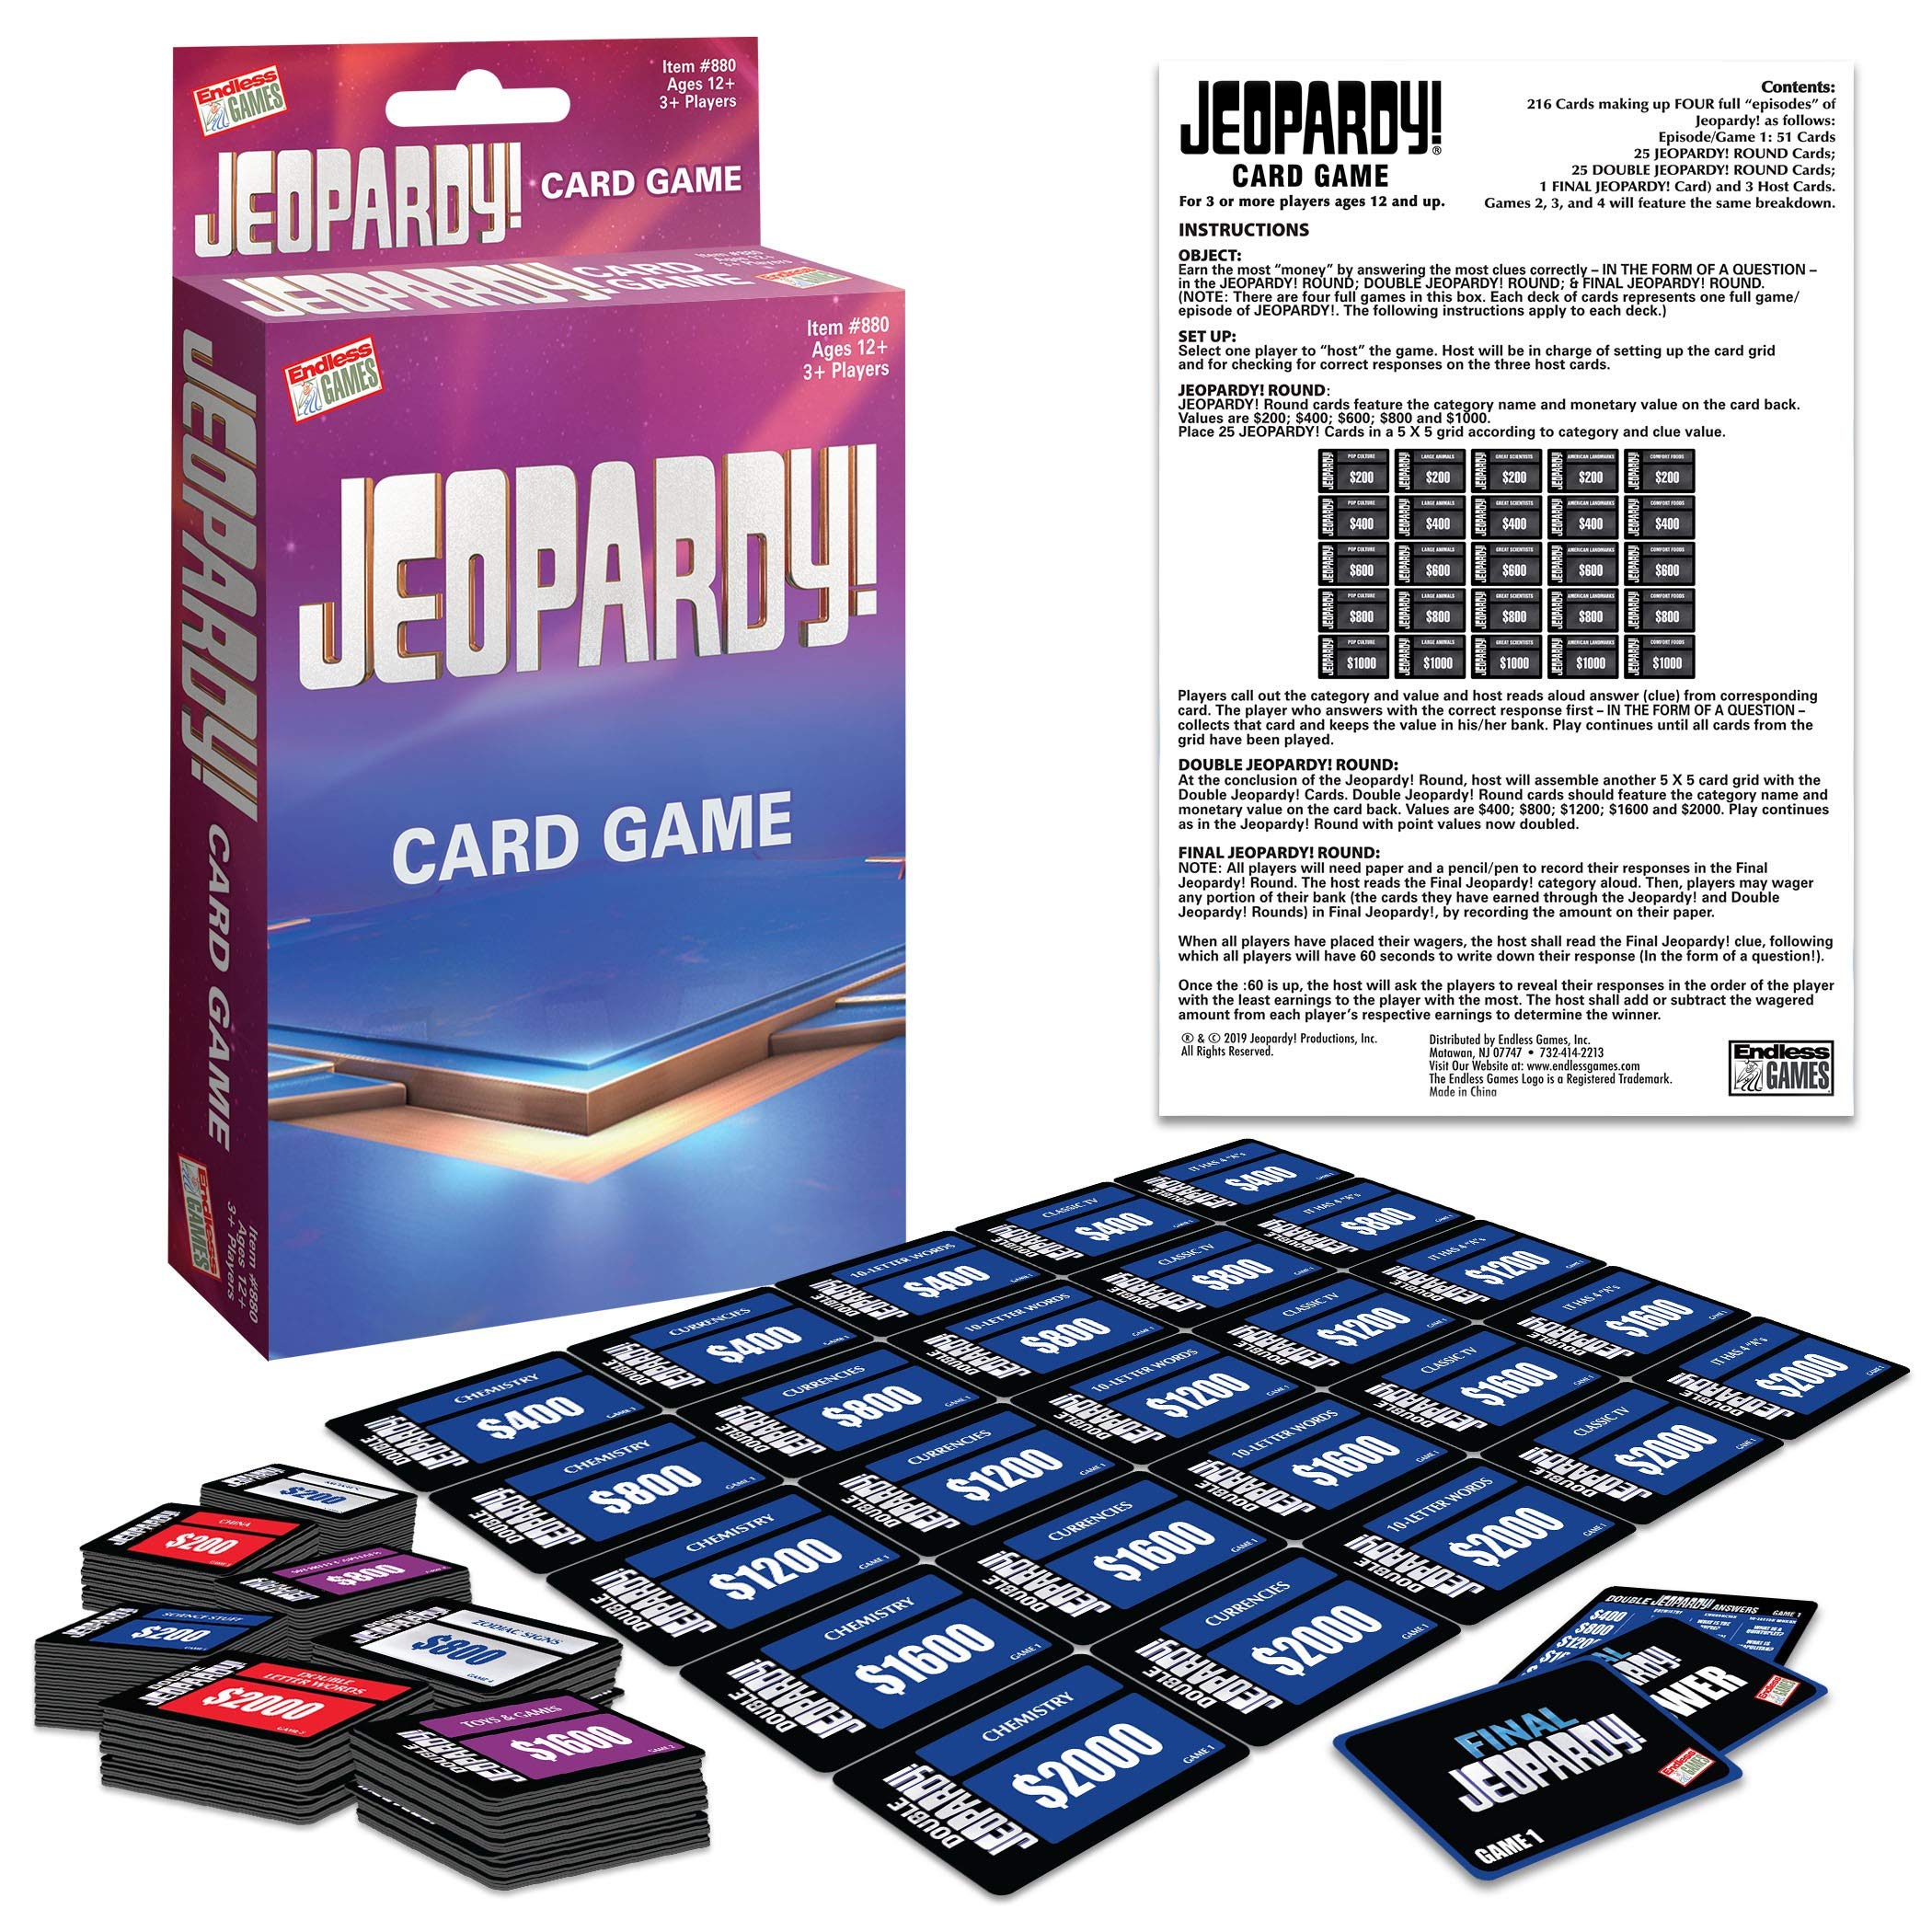 216-Cards Endless Games Travel Sized Jeopardy Card Game $4.19 + Free Shipping w/ Prime or on $25+